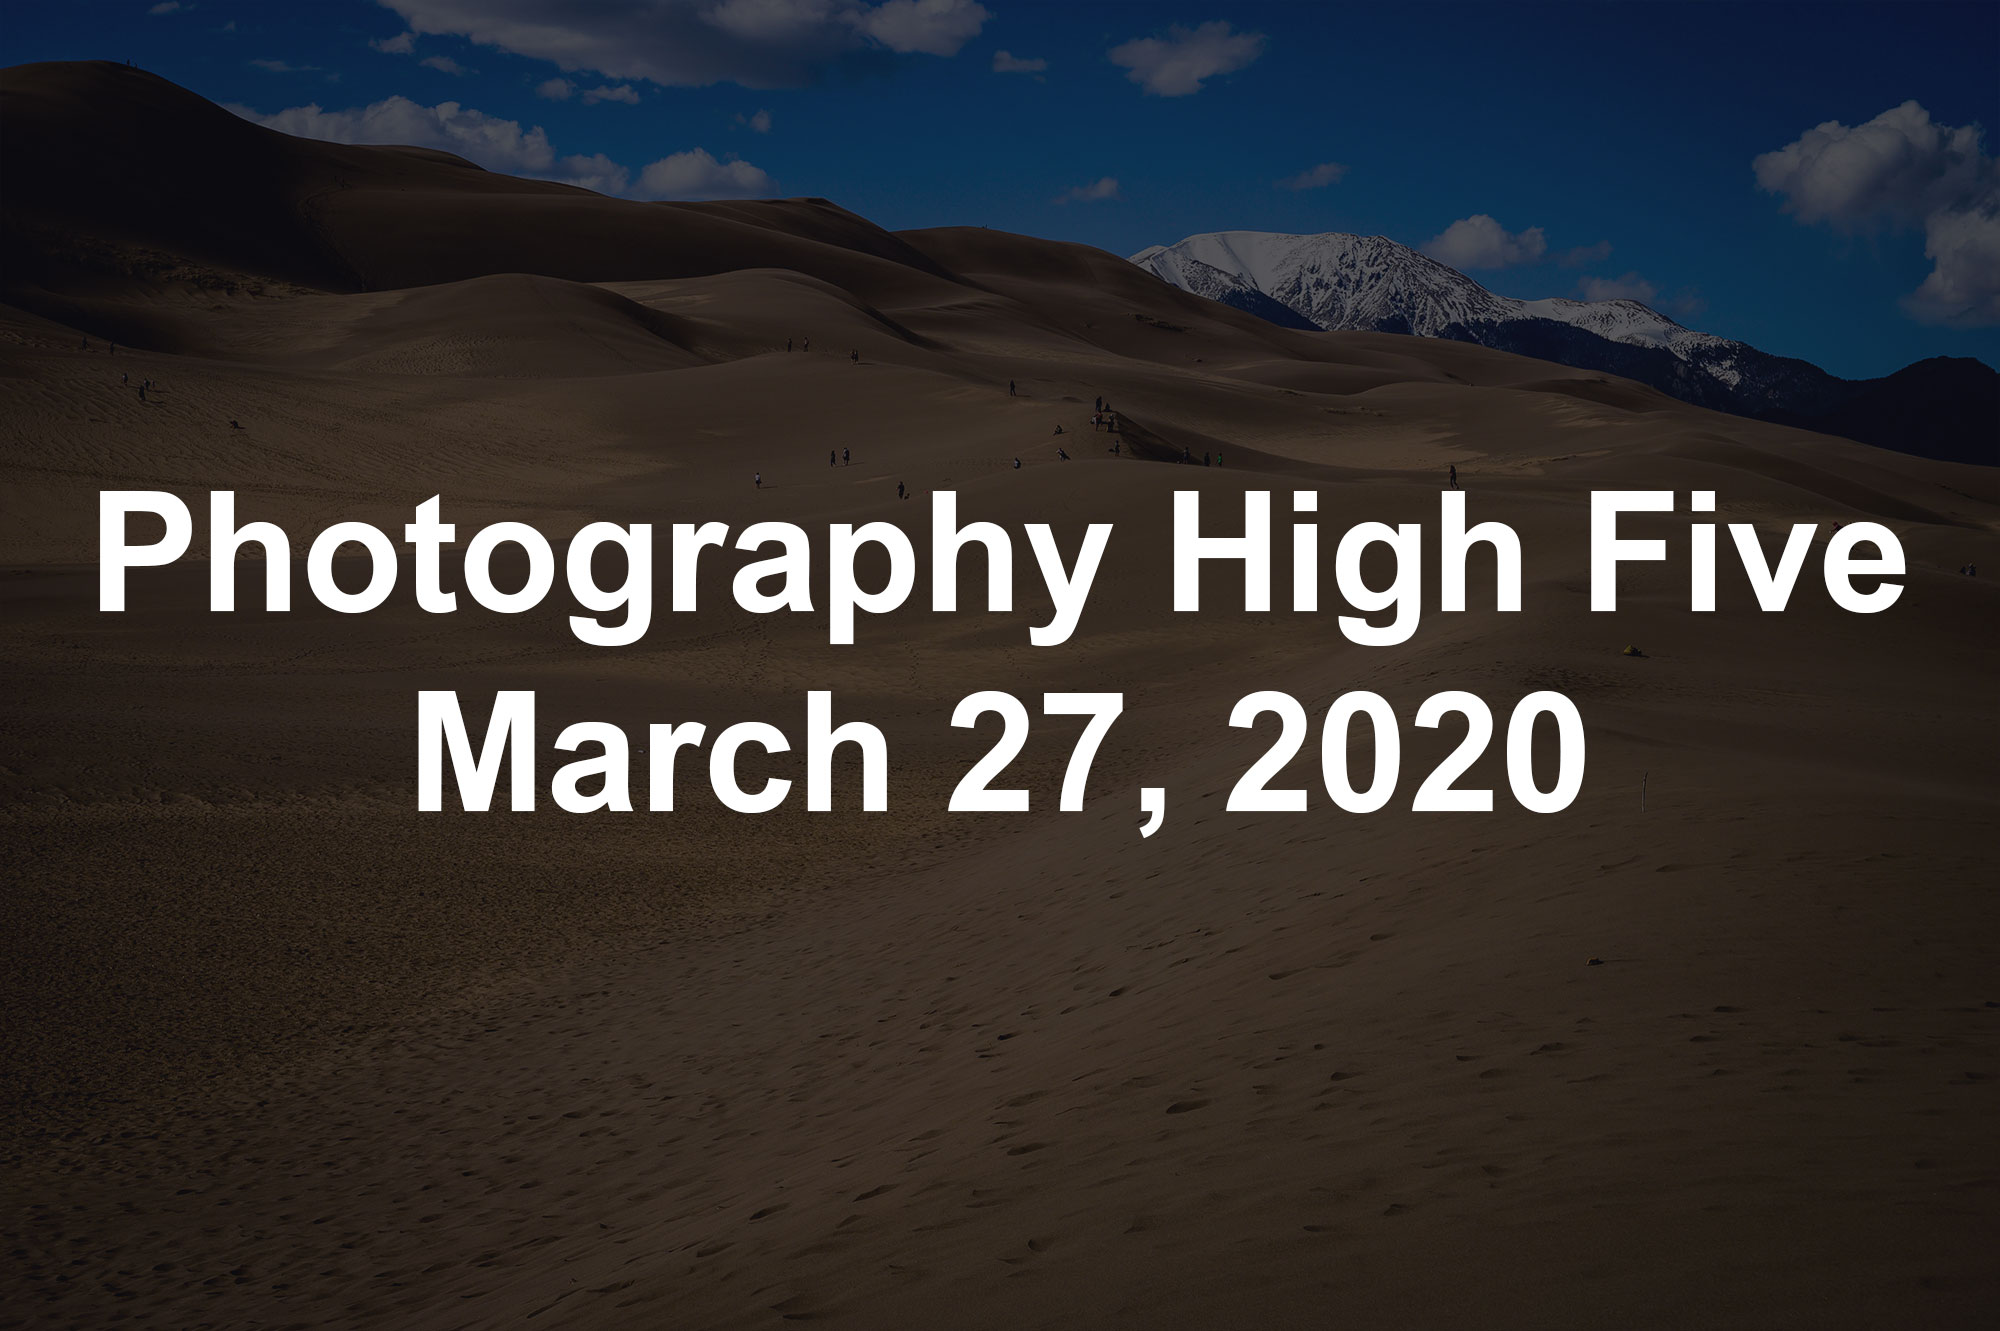 Photography High Five March 27, 2020